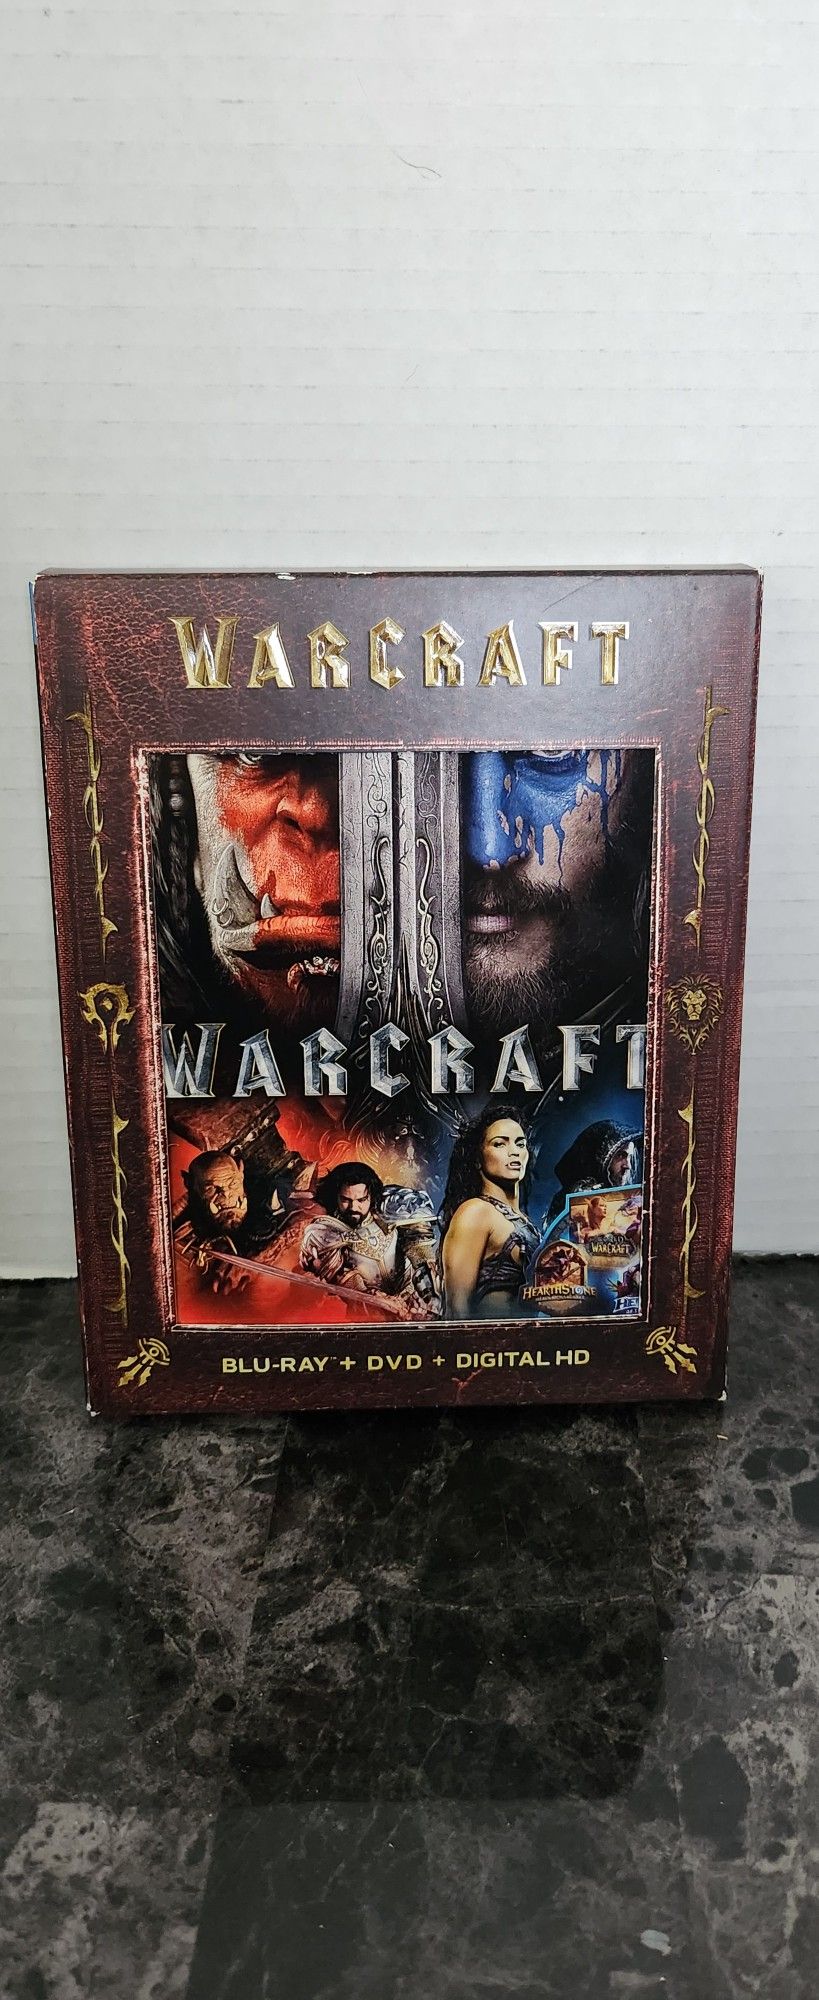 Warcraft (Target-Exclusive Blu-ray with 8 Collectible Cards - NO DIGITAL)
Cards never opened!